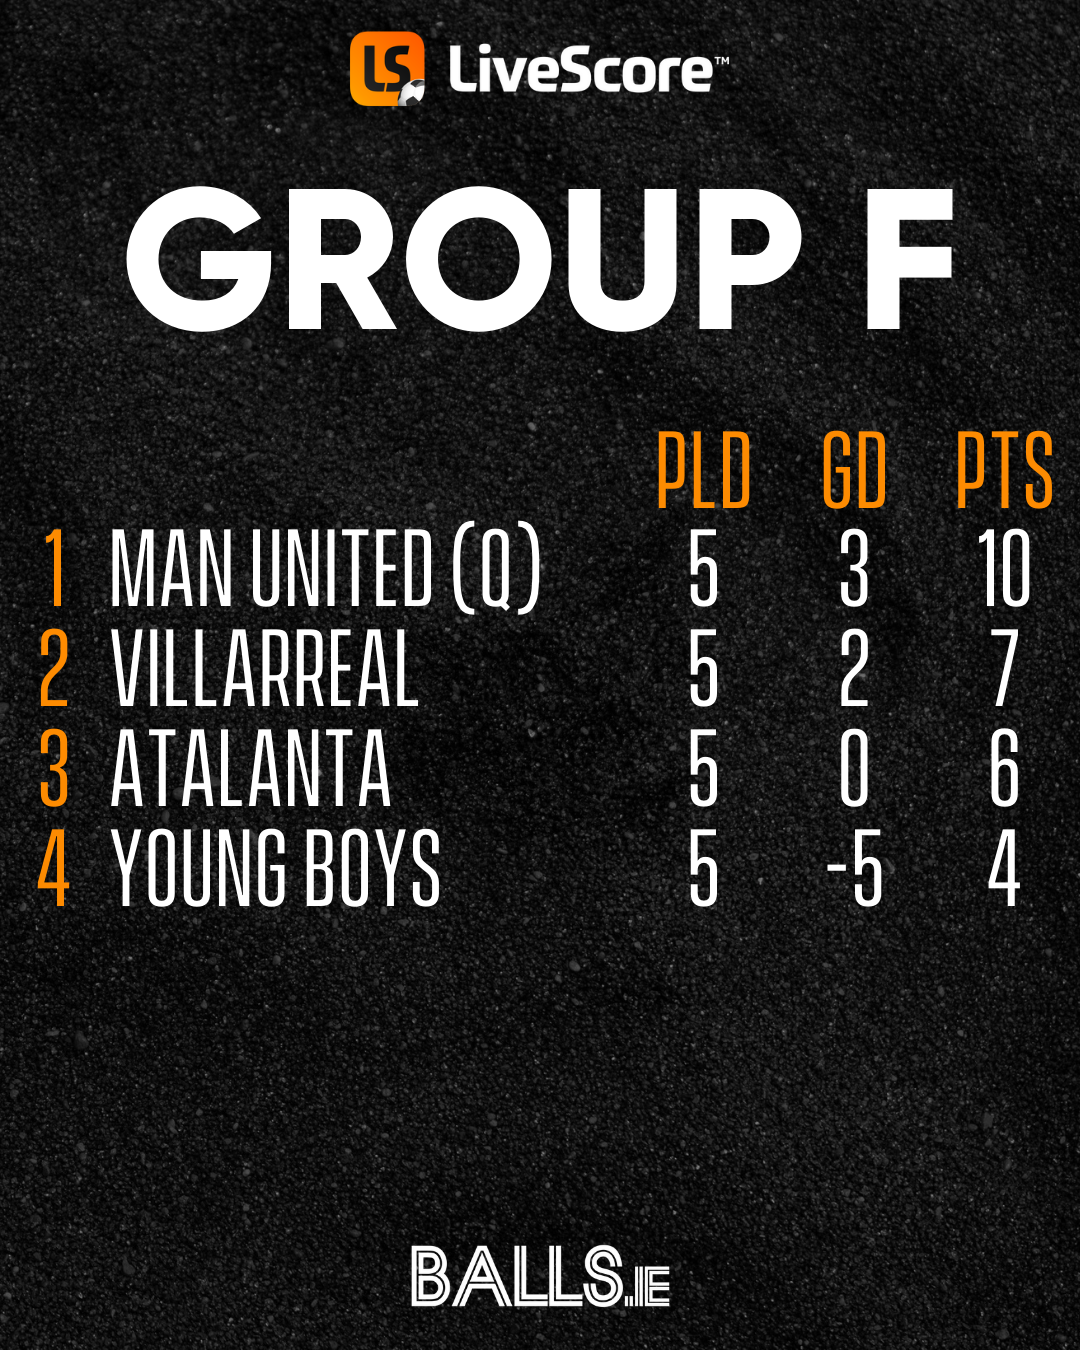 UCL Group F